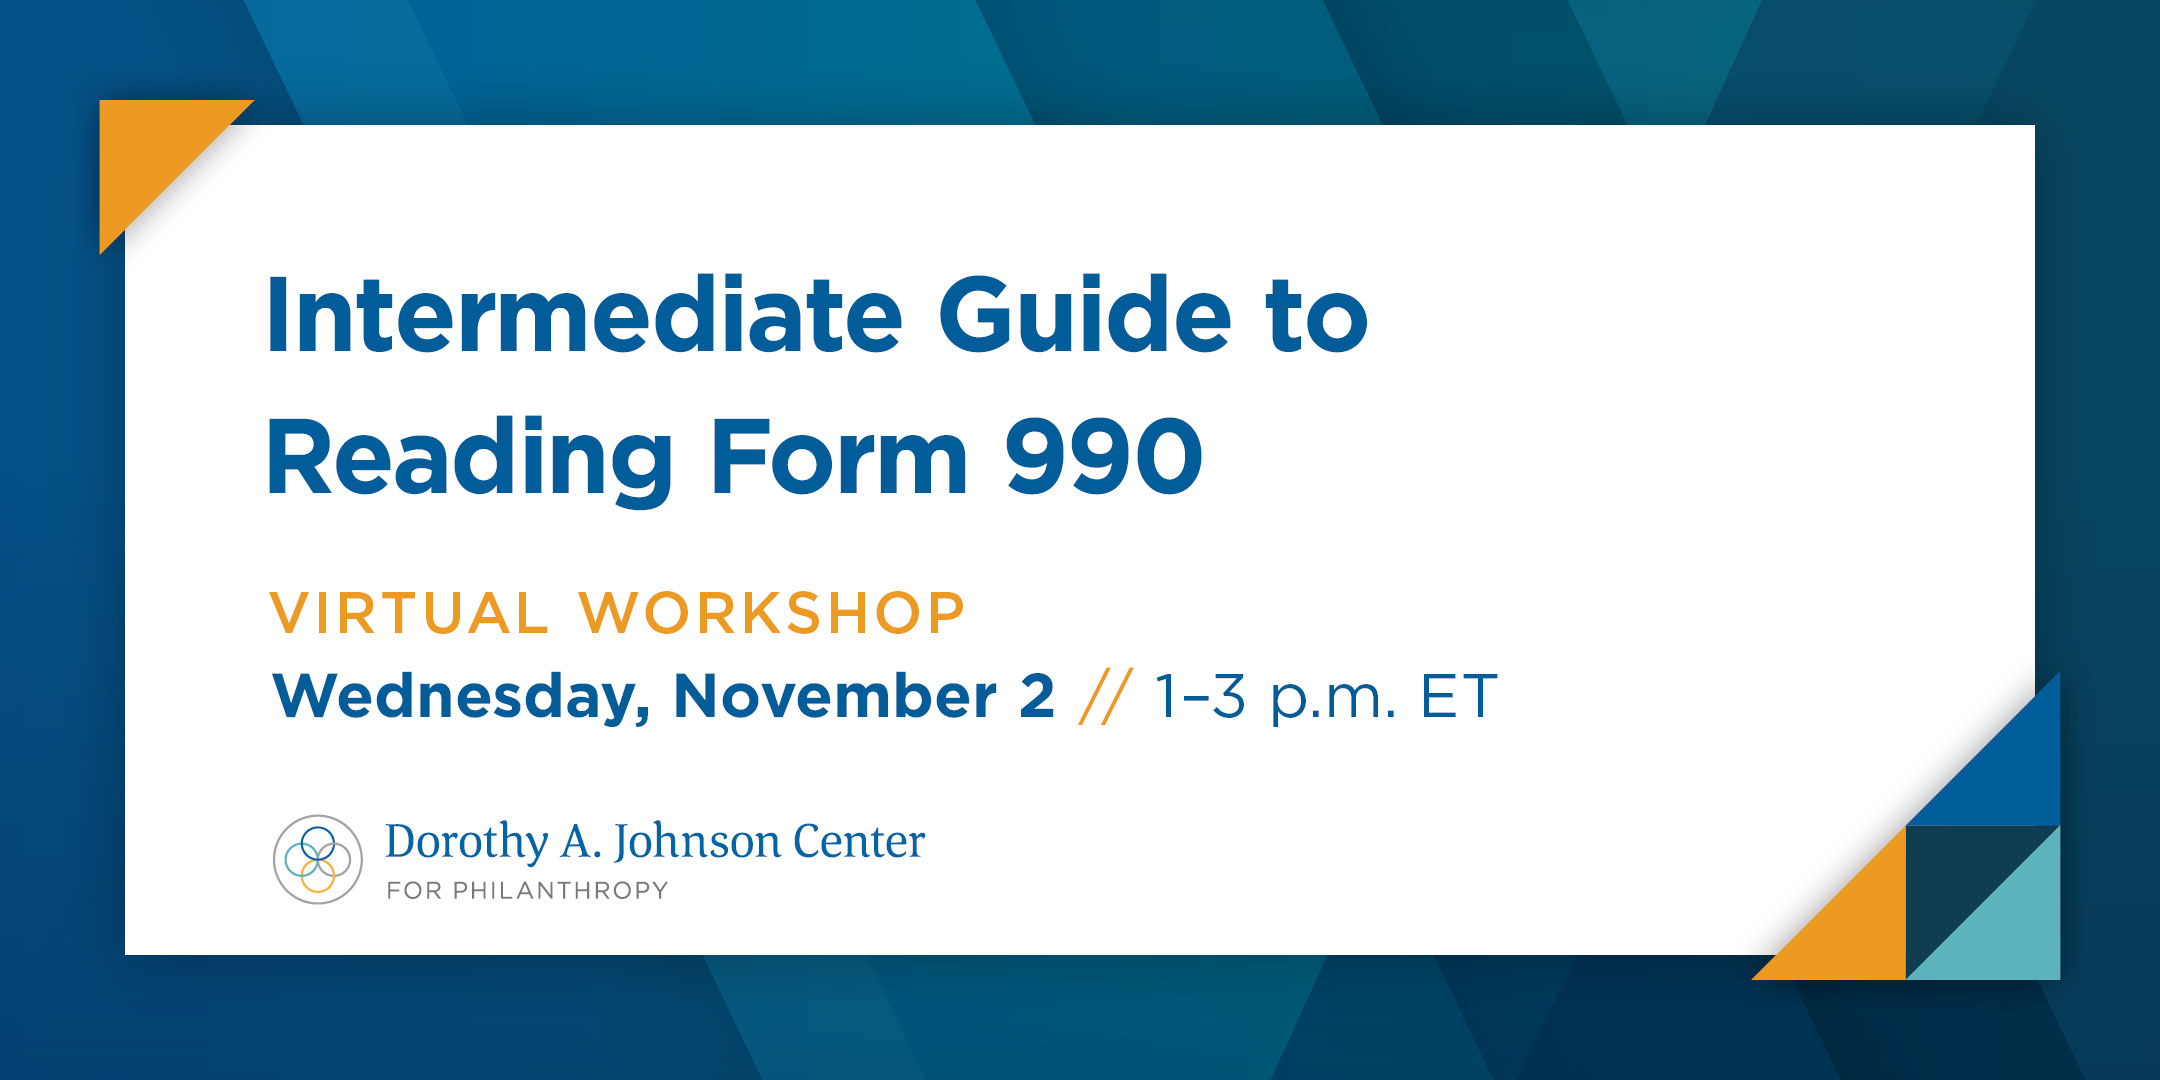 Intermediate Guide to Reading Form 990